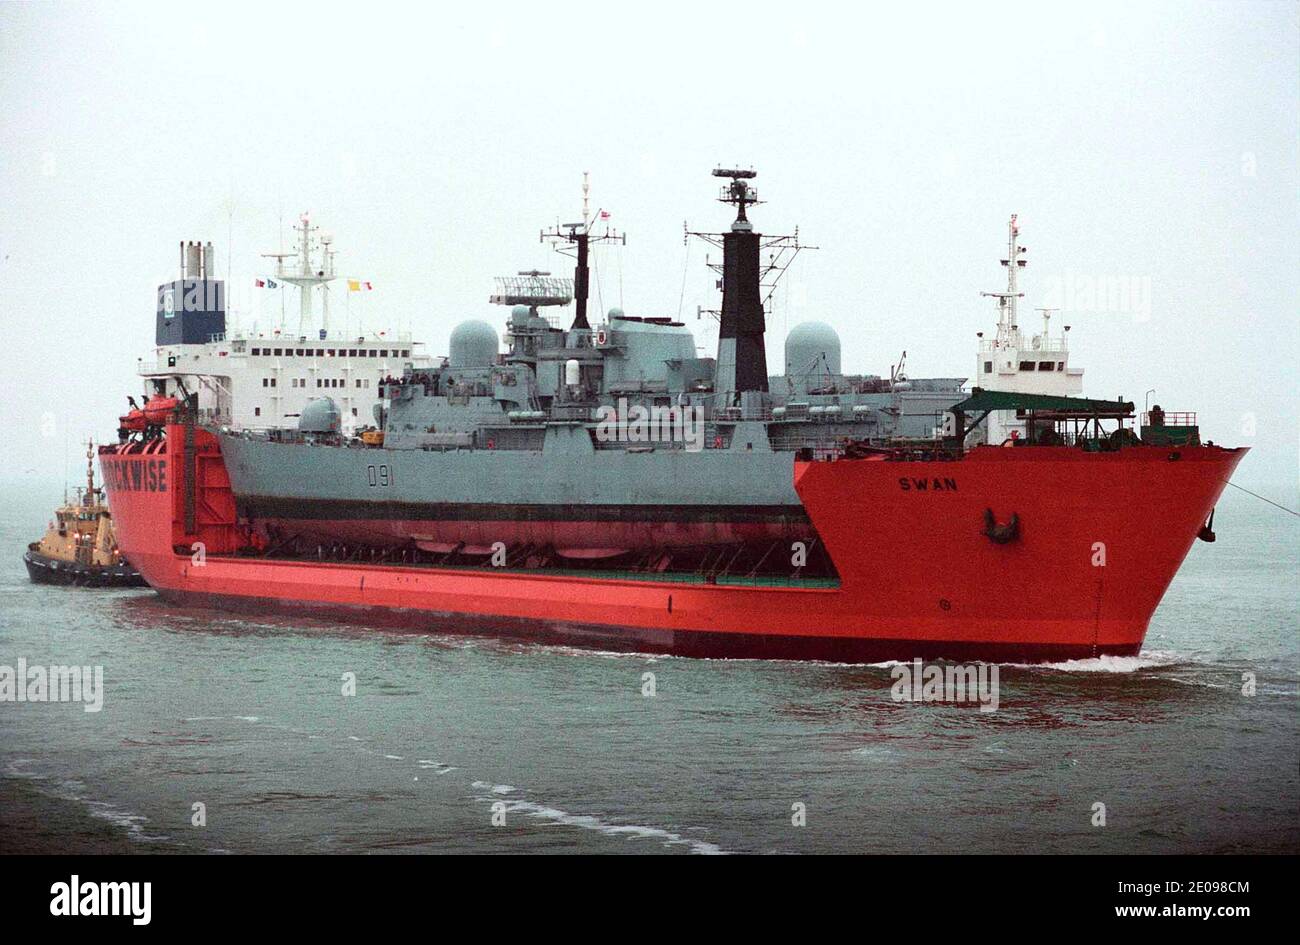 AJAXNETPHOTO. 08 DECEMBER, 2002. PORTSMOUTH. ENGLAND. - PIGGY BACK - THE SEMI SUBMERSIBLE HEAVY LIFT SHIP SWAN ENTERS PORTSMOUTH HARBOUR TODAY LOADED WITH THE ROYAL NAVY'S DESTROYER NOTTINGHAM WHICH RAN AGROUND OFF HOWE ISLAND IN THE PACIFIC EARLIER THIS YEAR.  PHOTO:JONATHAN EASTLAND/AJAX  REF:(PMO2)21012 10 Stock Photo